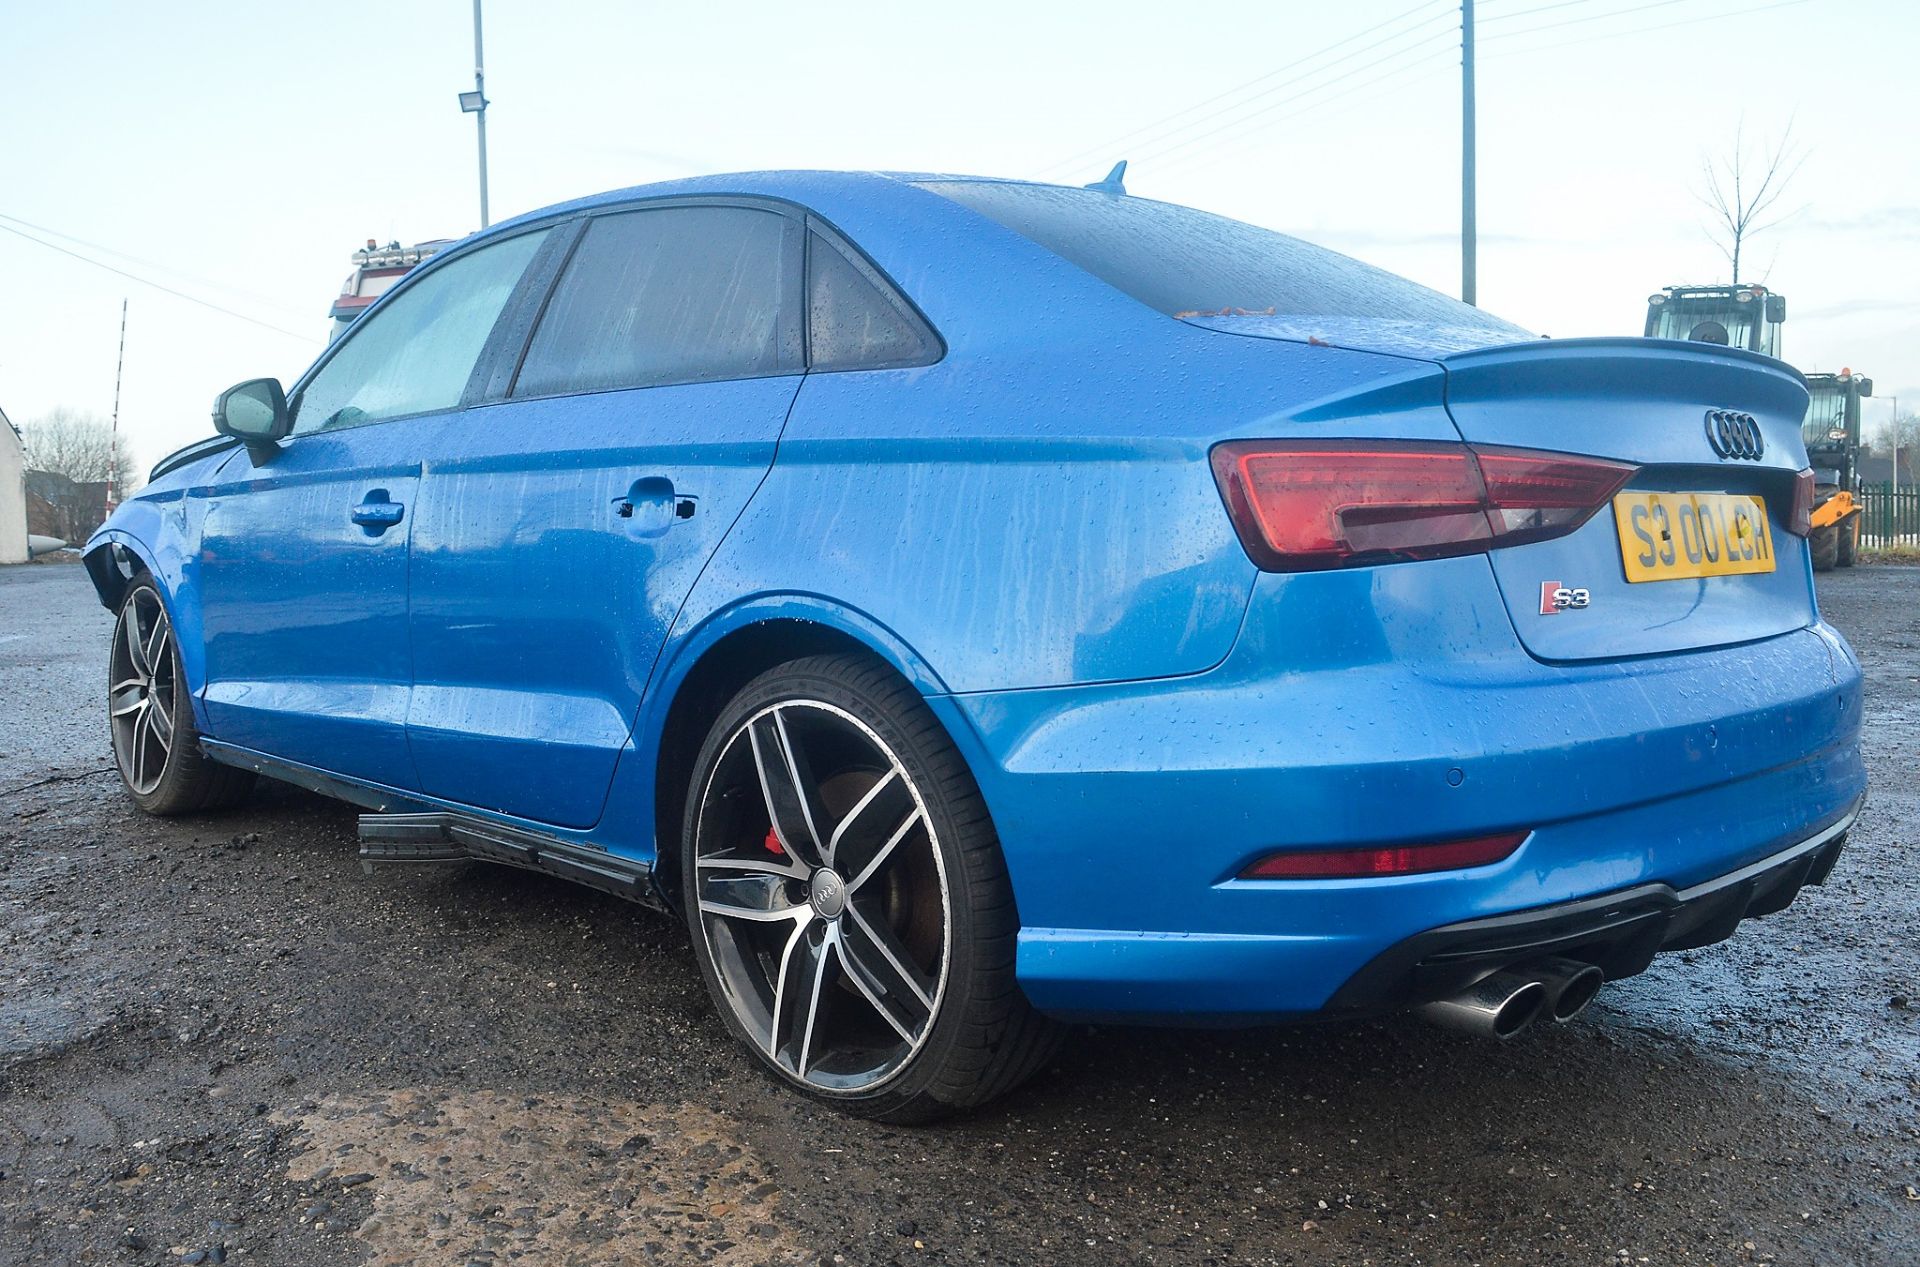 Audi S3 TFSi Quattro Black Edition 4 door saloon car Registration Number: S300 LCH Date of - Image 3 of 12